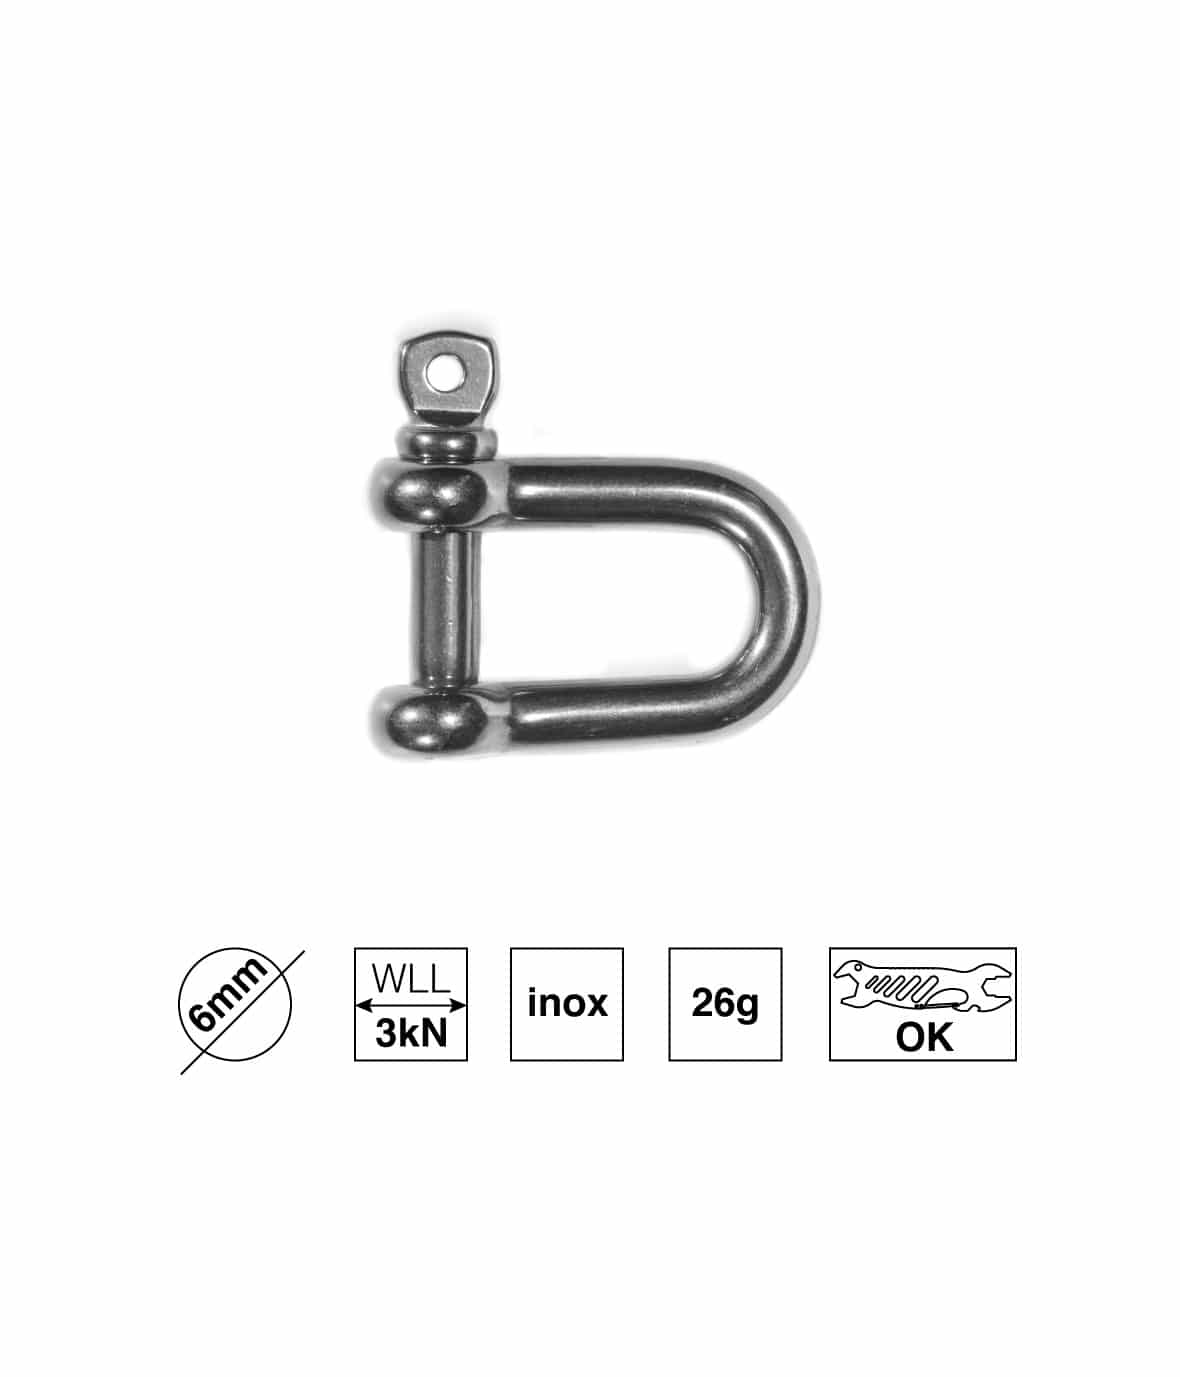 6mm d shackle